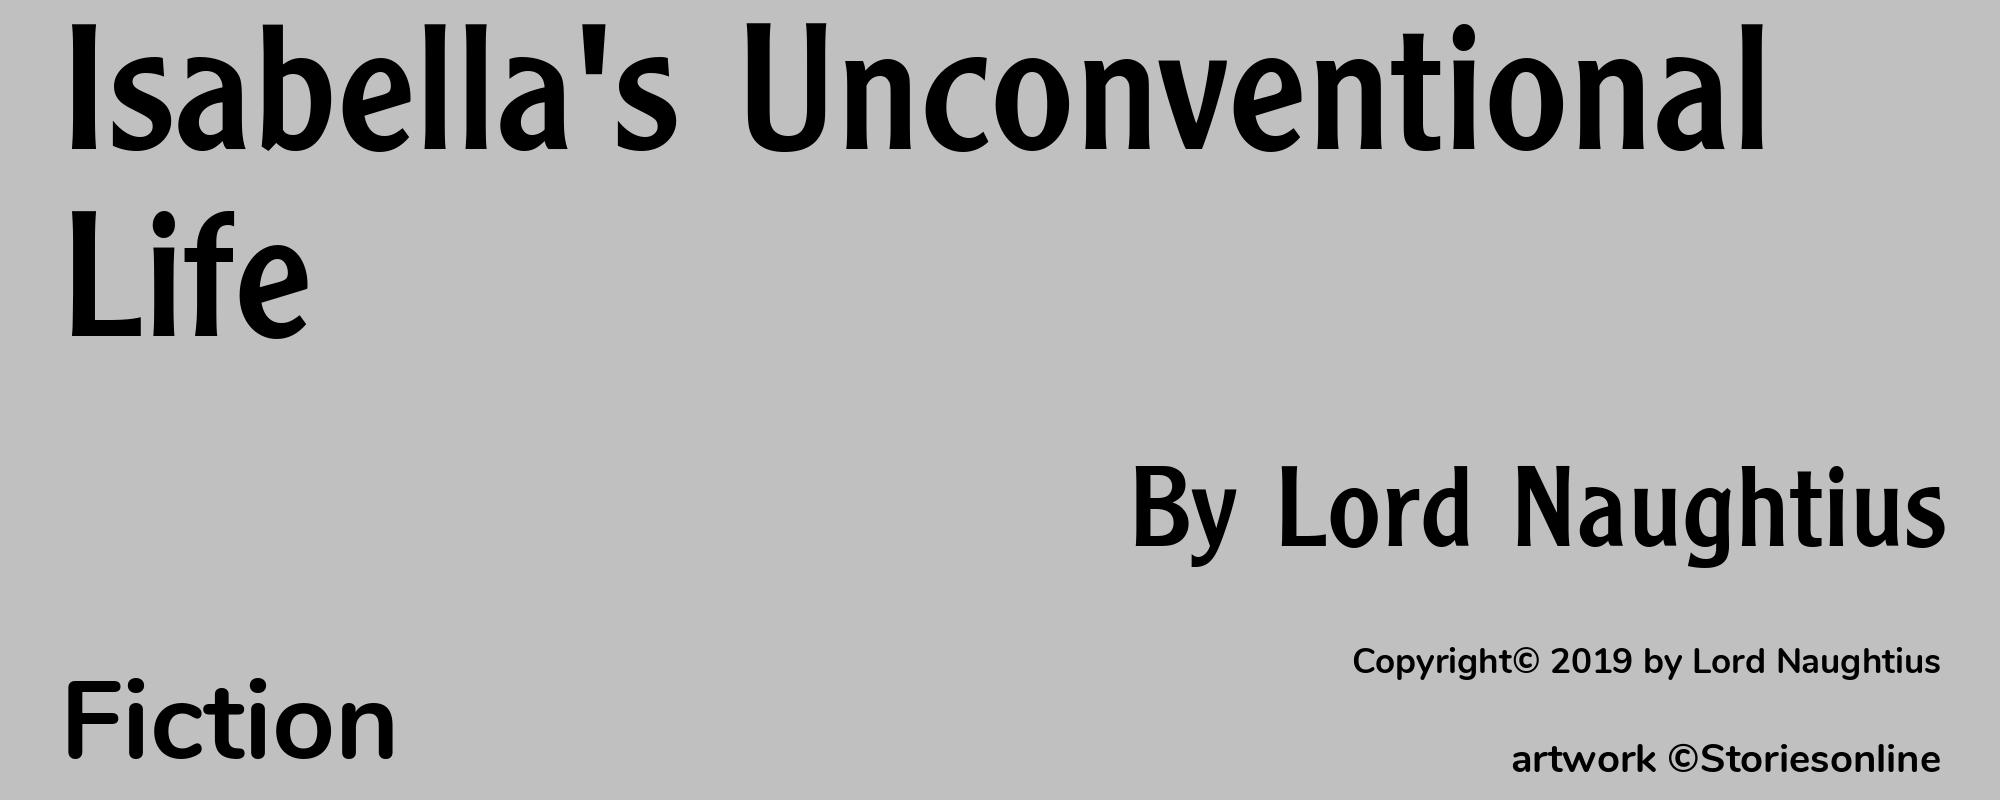 Isabella's Unconventional Life - Cover